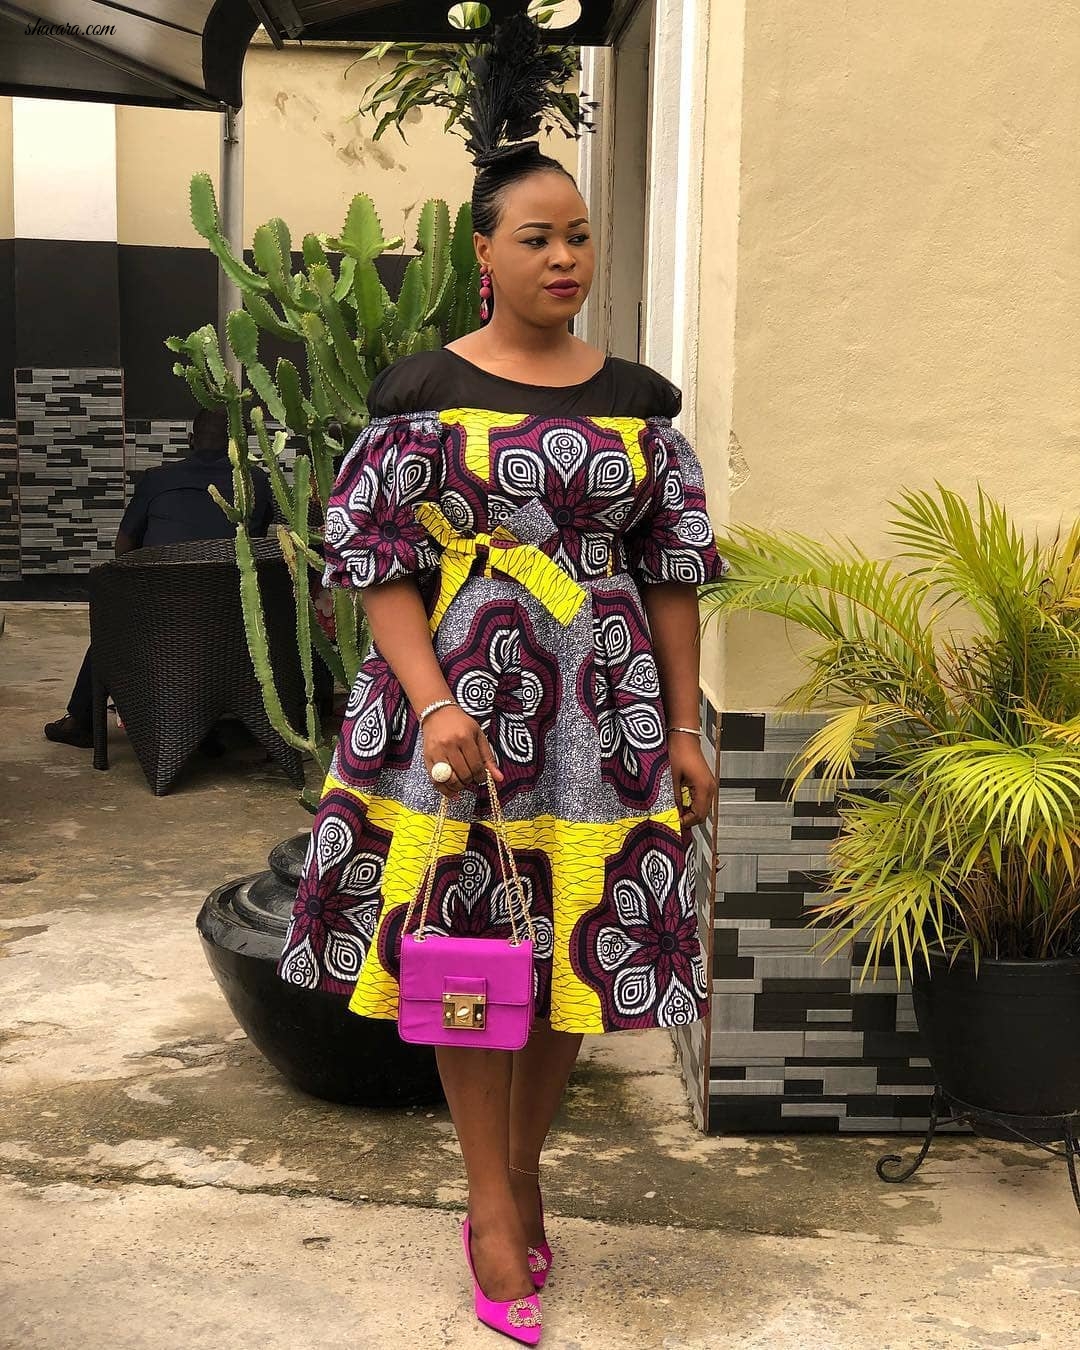 YOU DON’T WANT TO MISS THE TOP 10 ANKARA STYLES SLAYED OVER THE EASTER WEEKEND